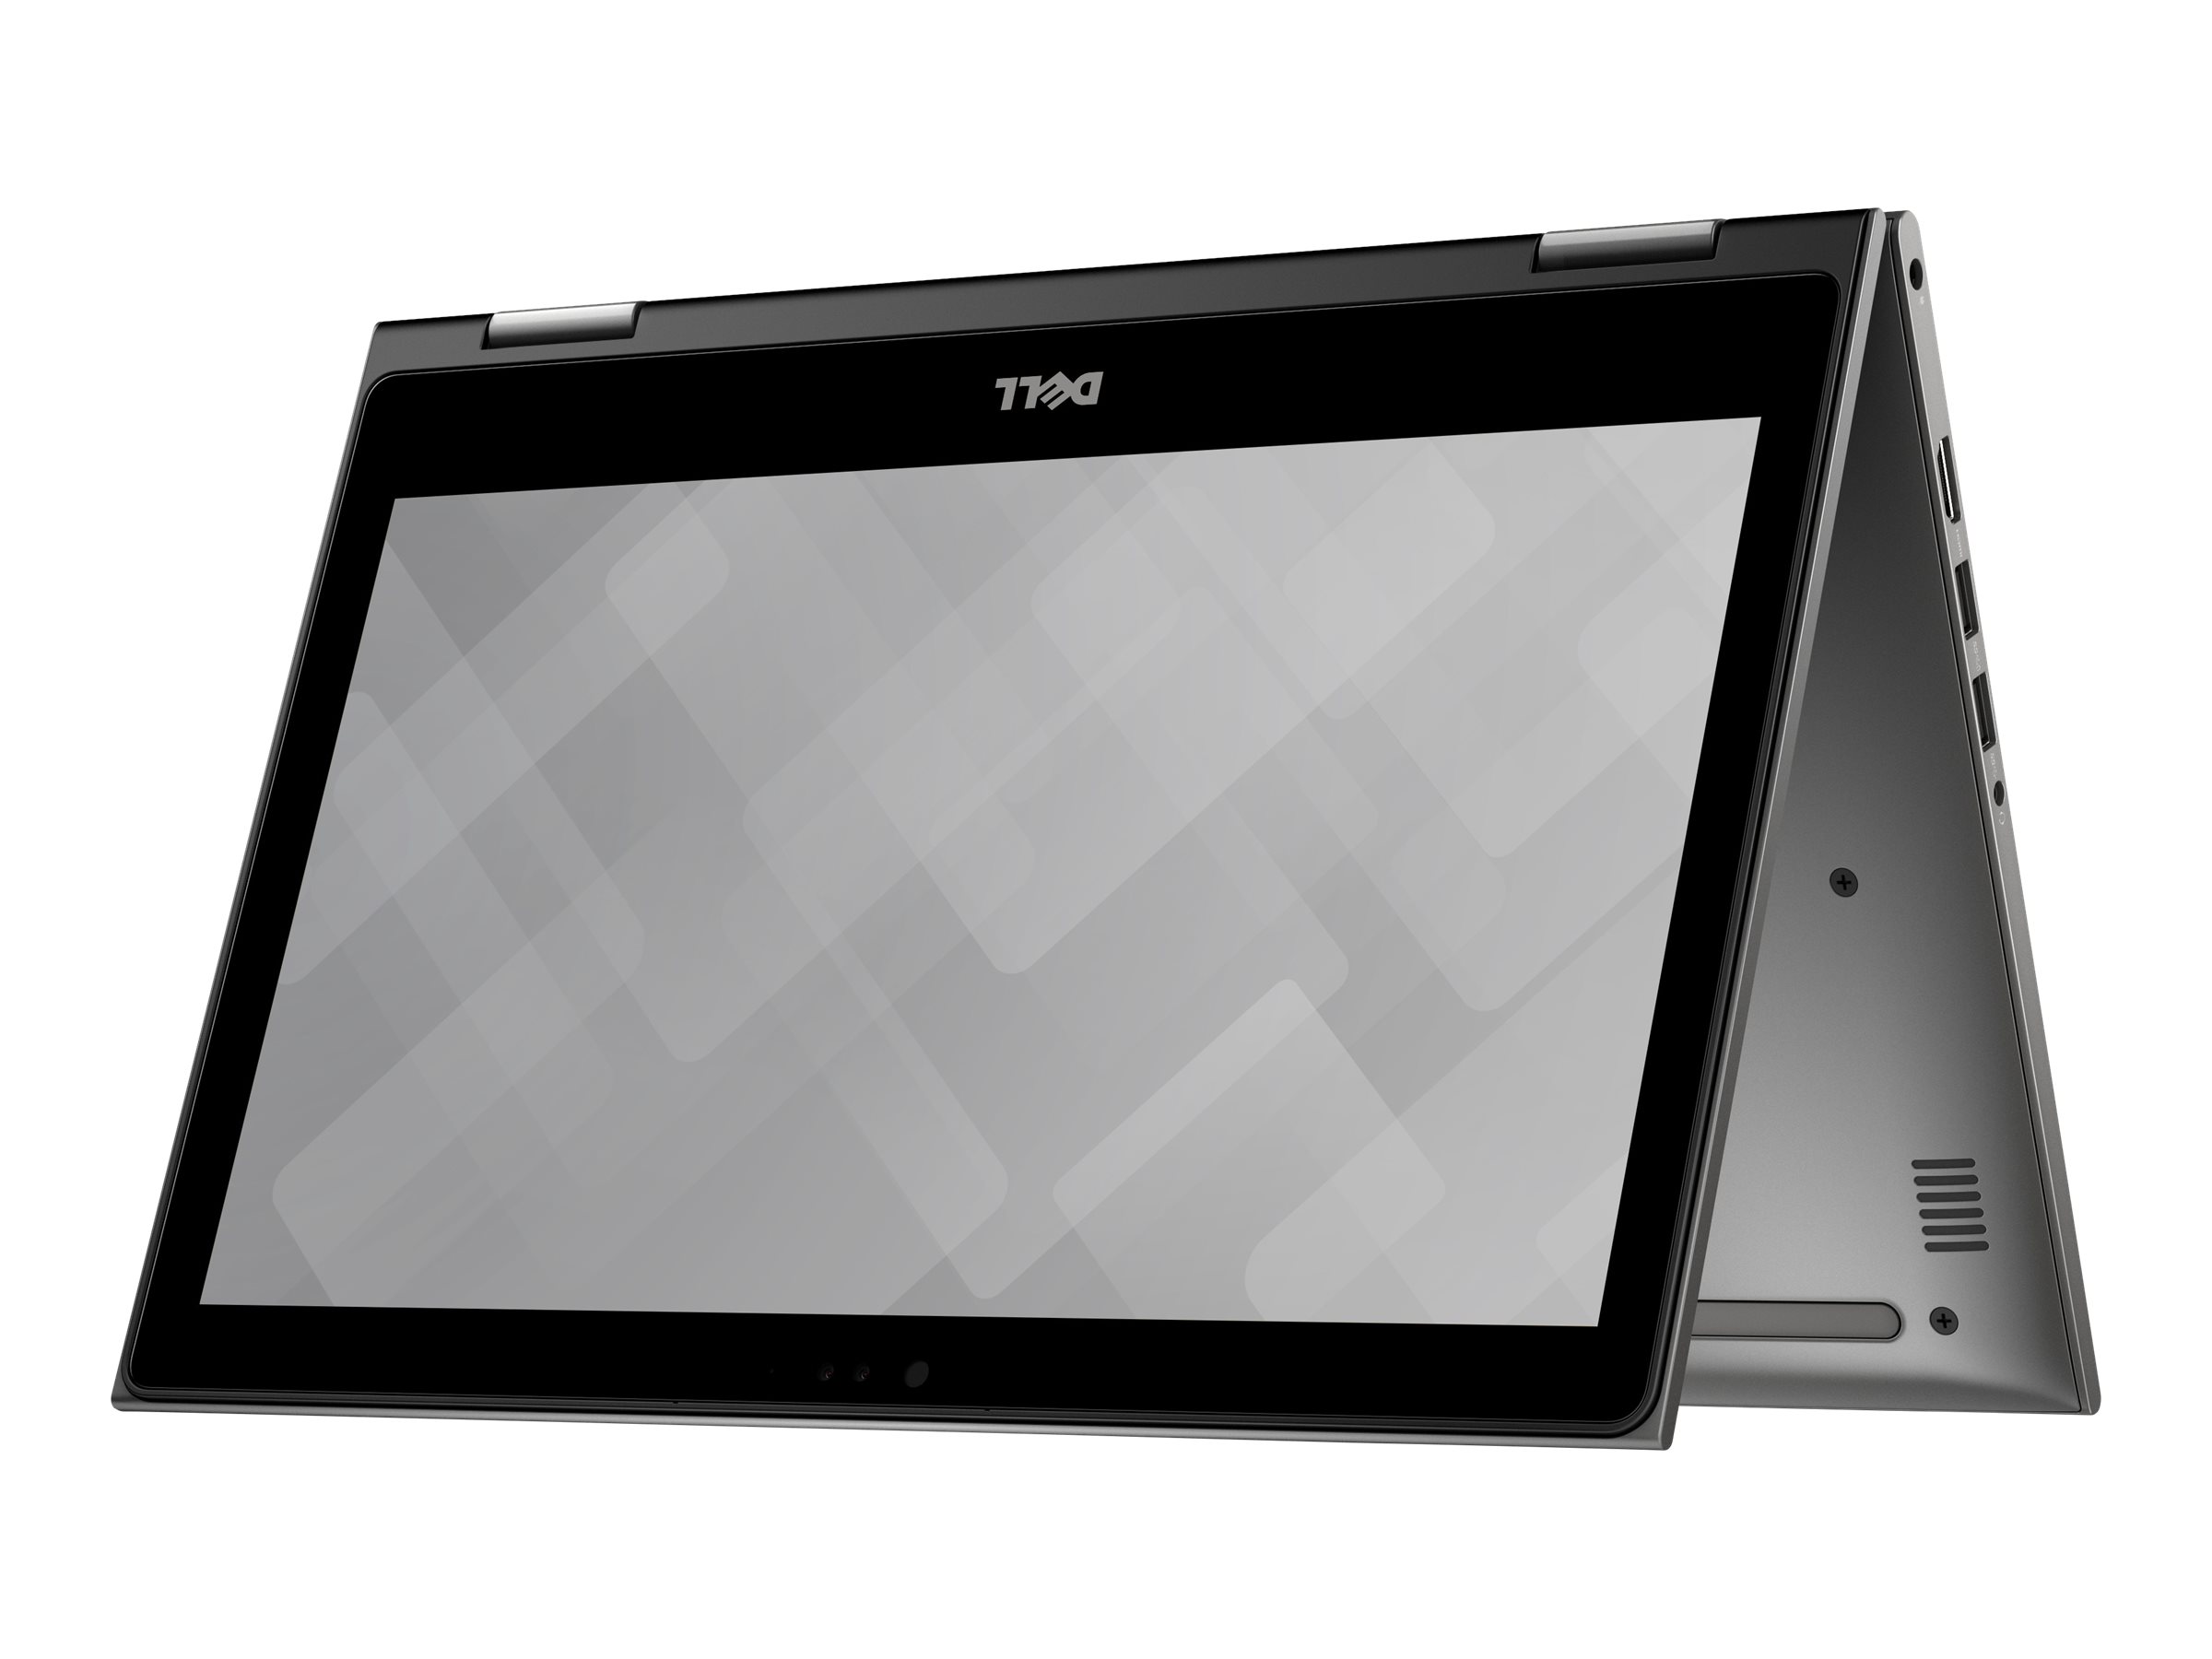 Inspiron 13 5368 2 in 1 Notebook - image 4 of 16